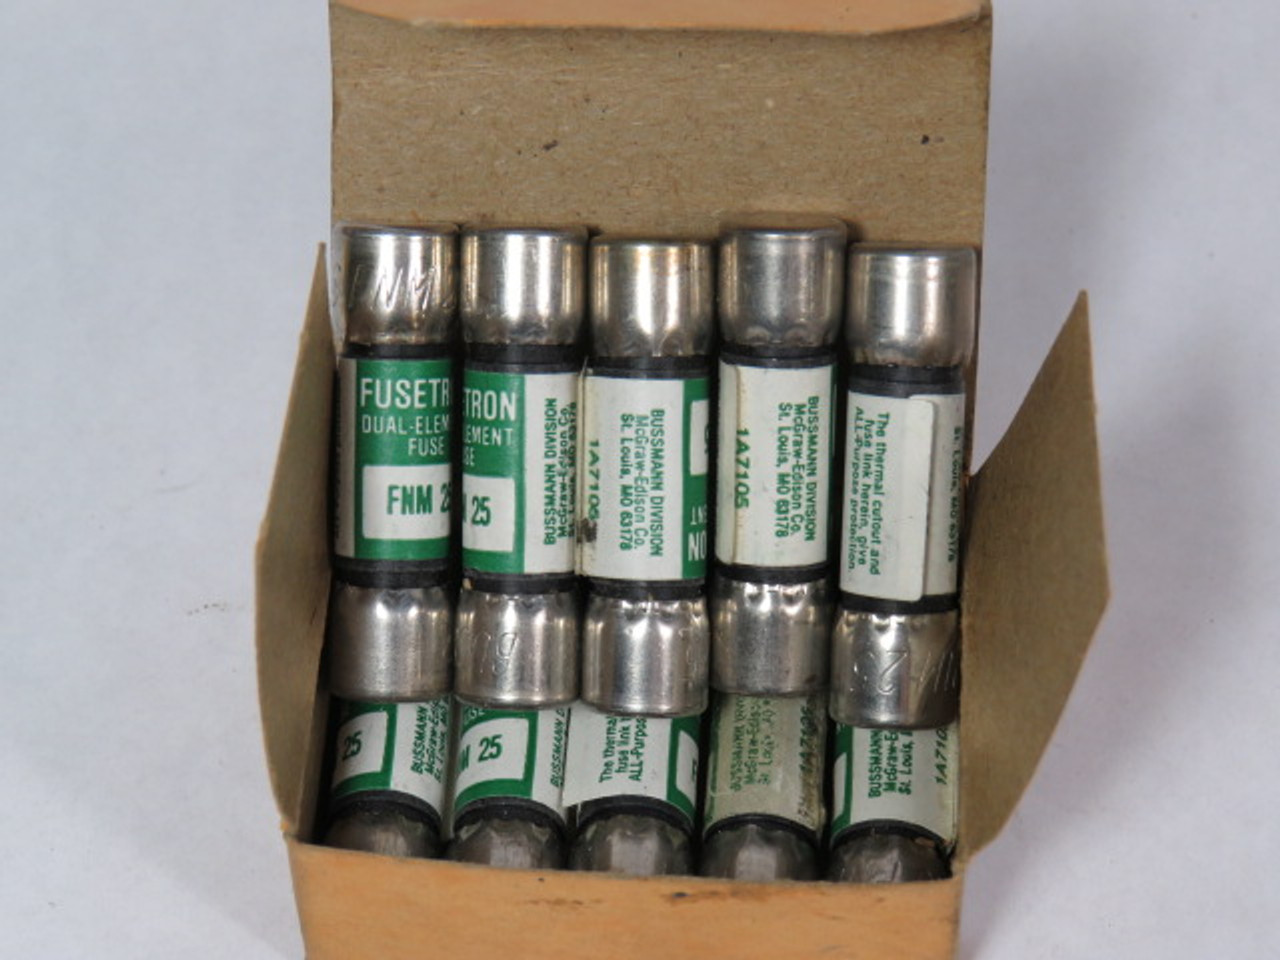 Fusetron FNM-25 Fuse 25A 32V Lot of 10 USED